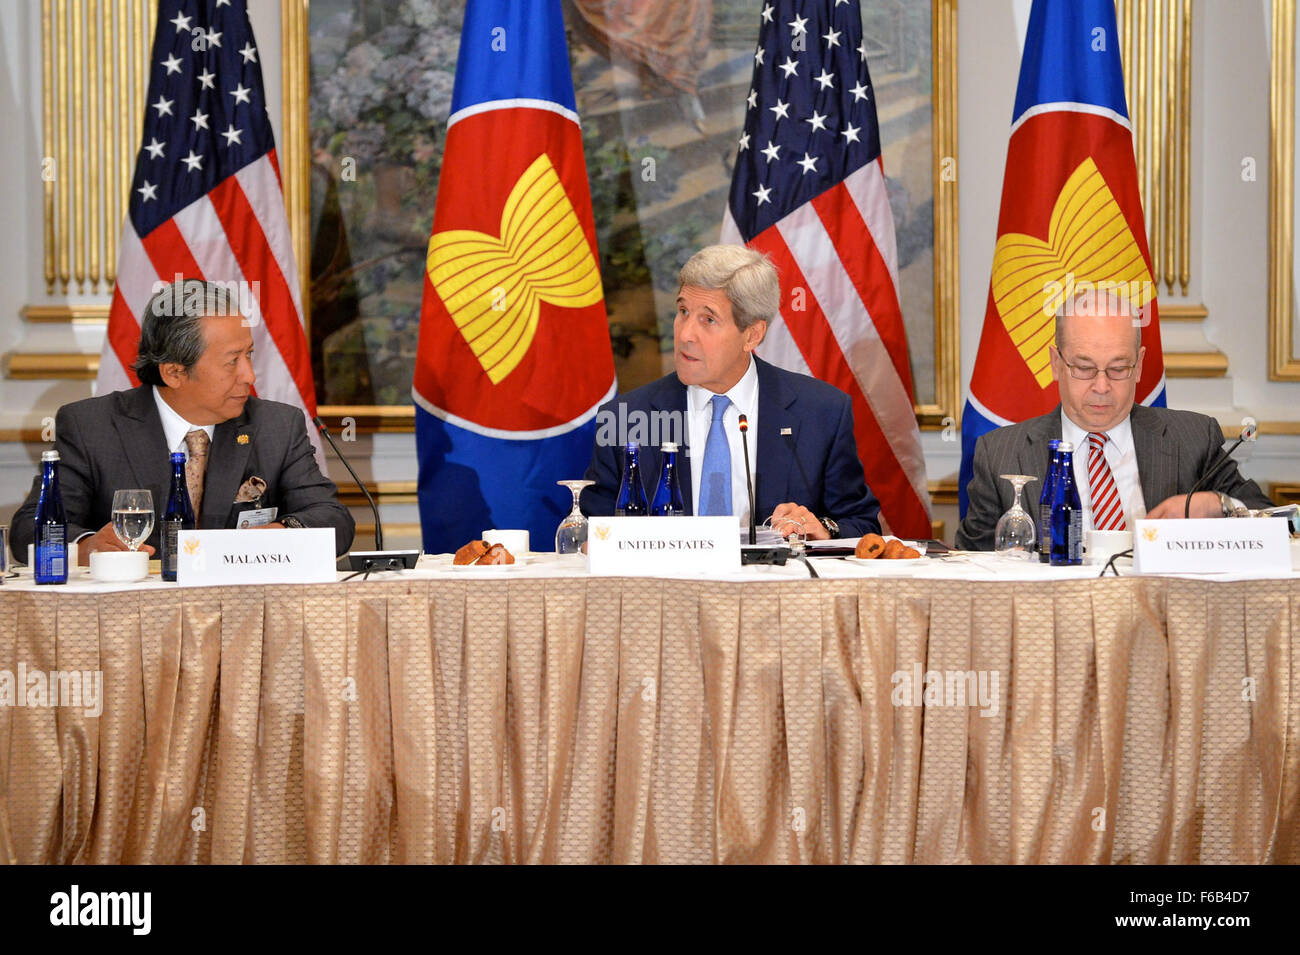 Secretary Kerry Participates in the U.S.-ASEAN Meeting in New York City Stock Photo